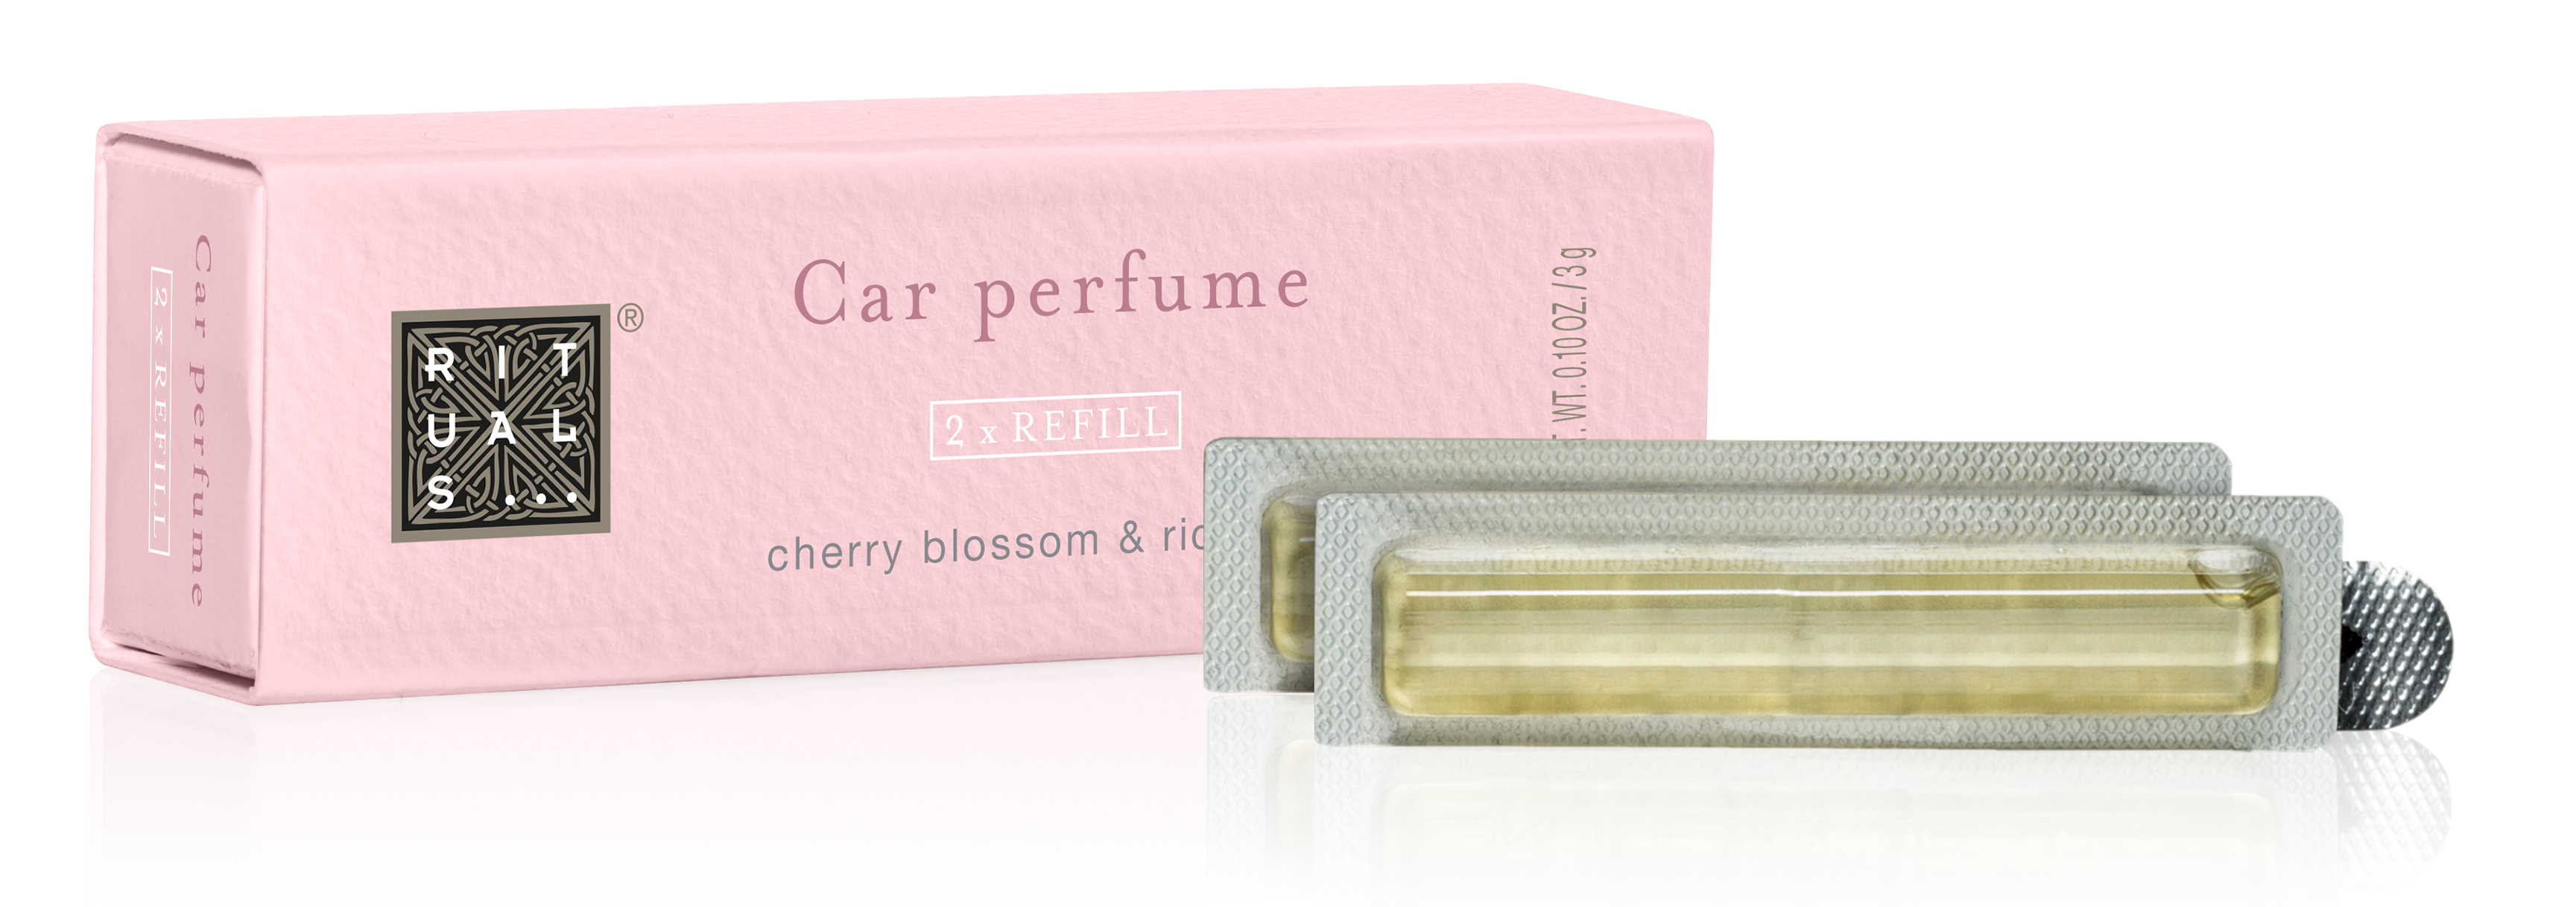 Ritual The of Hammam Life is a Journey - Car Perfume Parfum pour Voiture, 6  GR - OXYBIOS